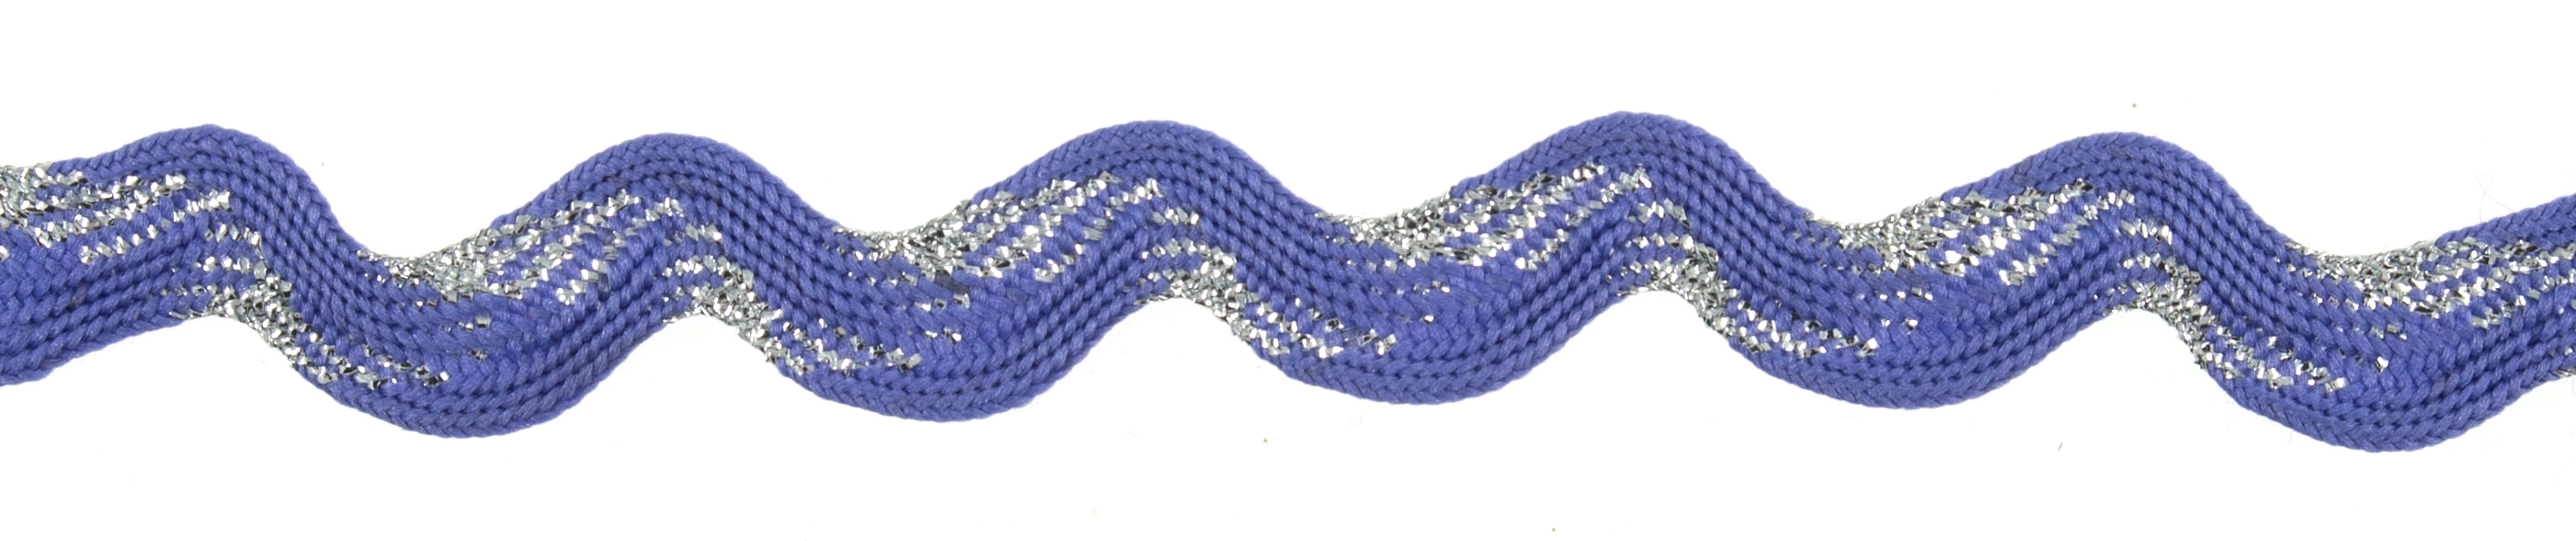 Picture of Trim: Ric Rac: Metallic: 25m x 10mm: Lilac and Silver